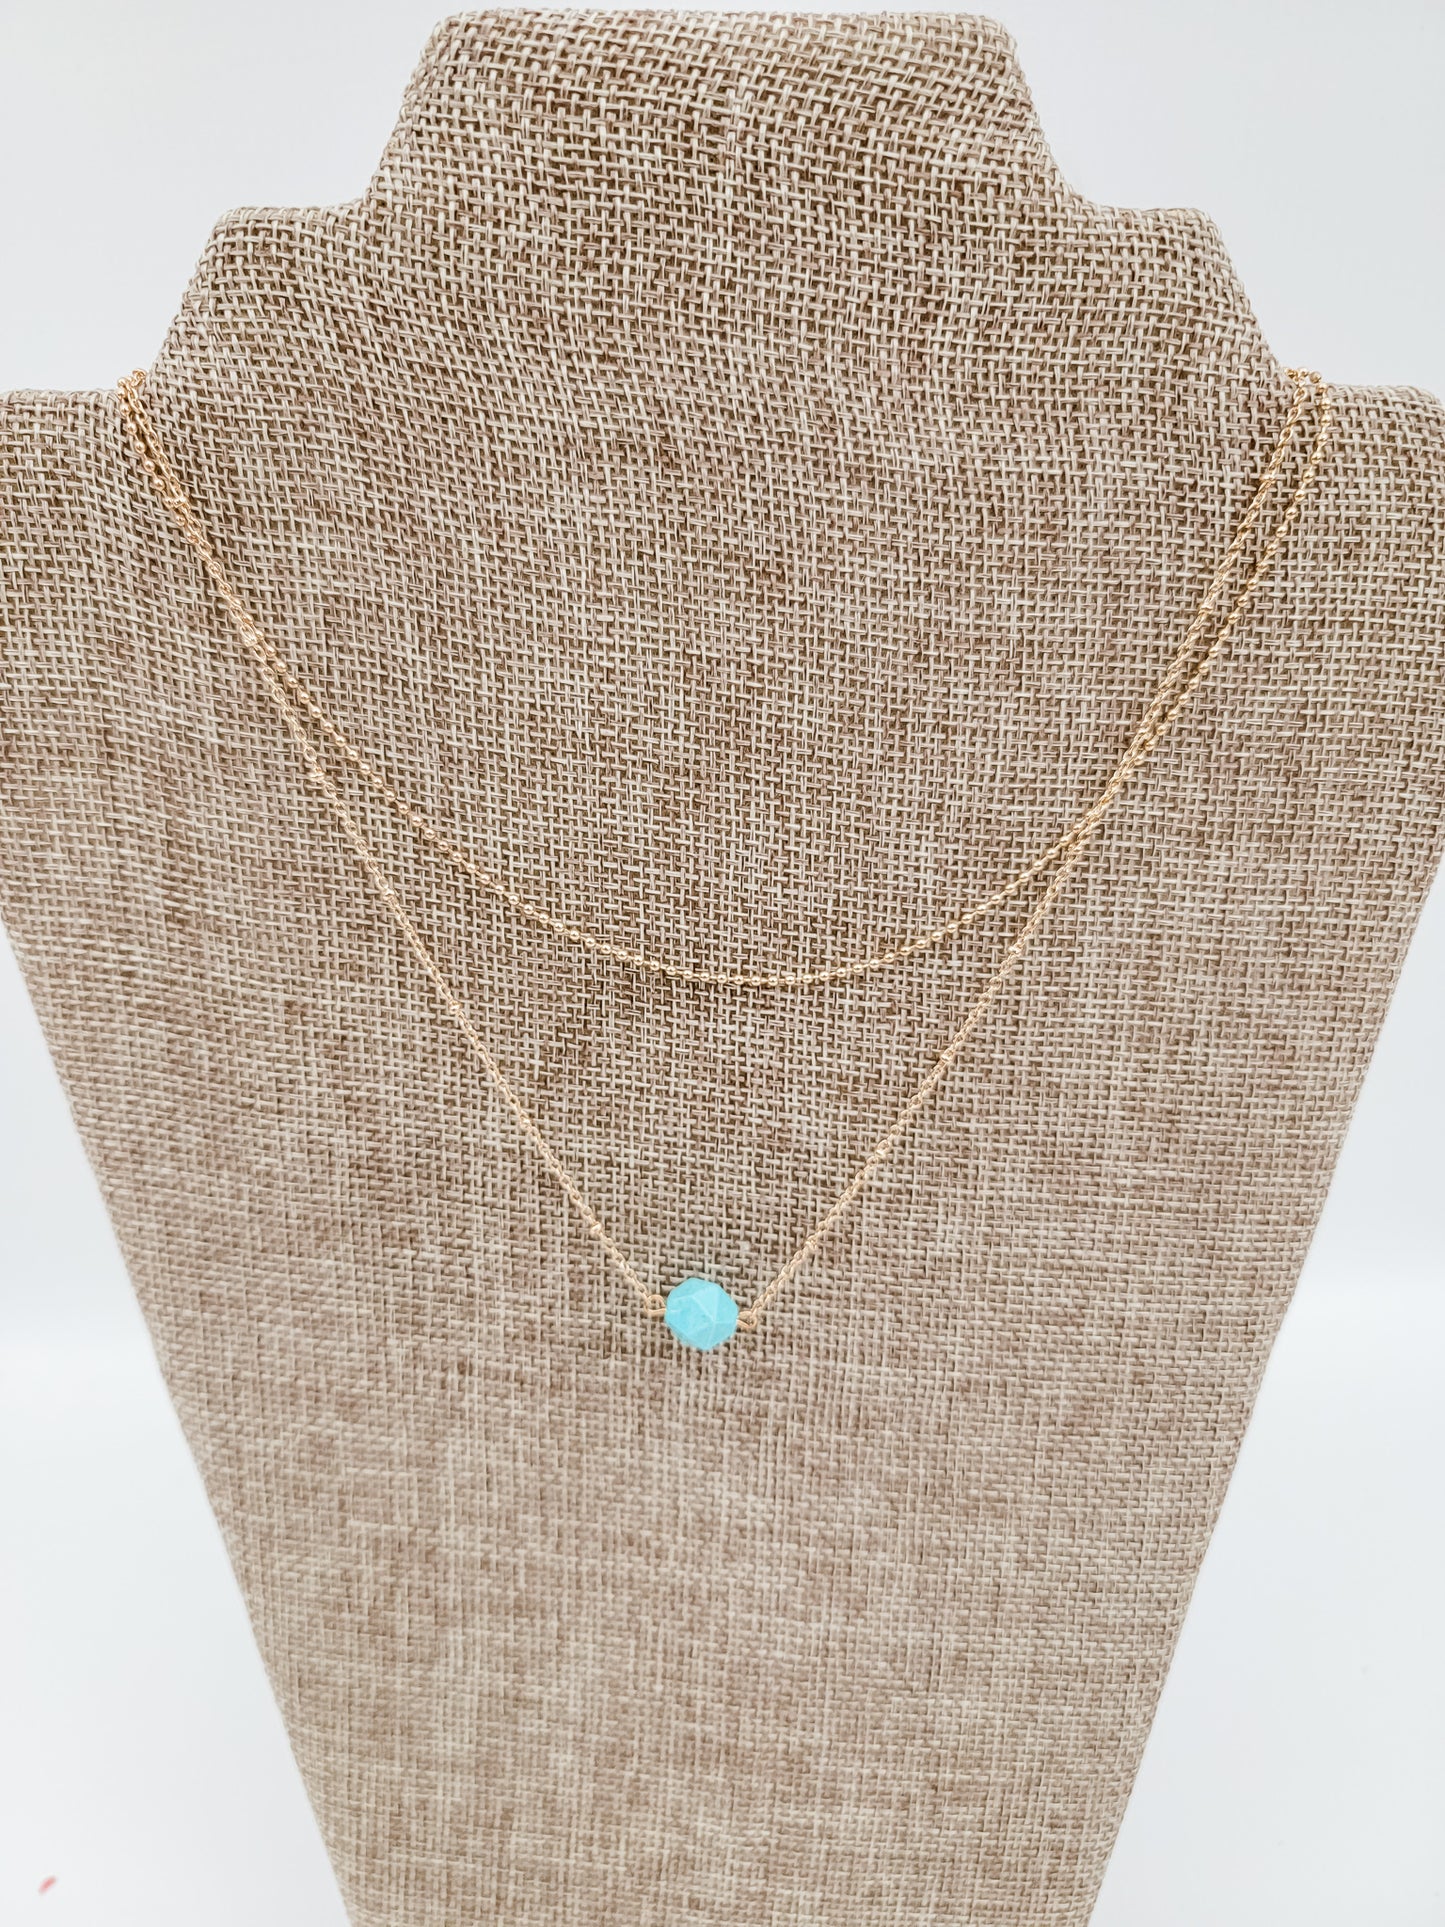 Gold Double Chain Necklace with Turquoise